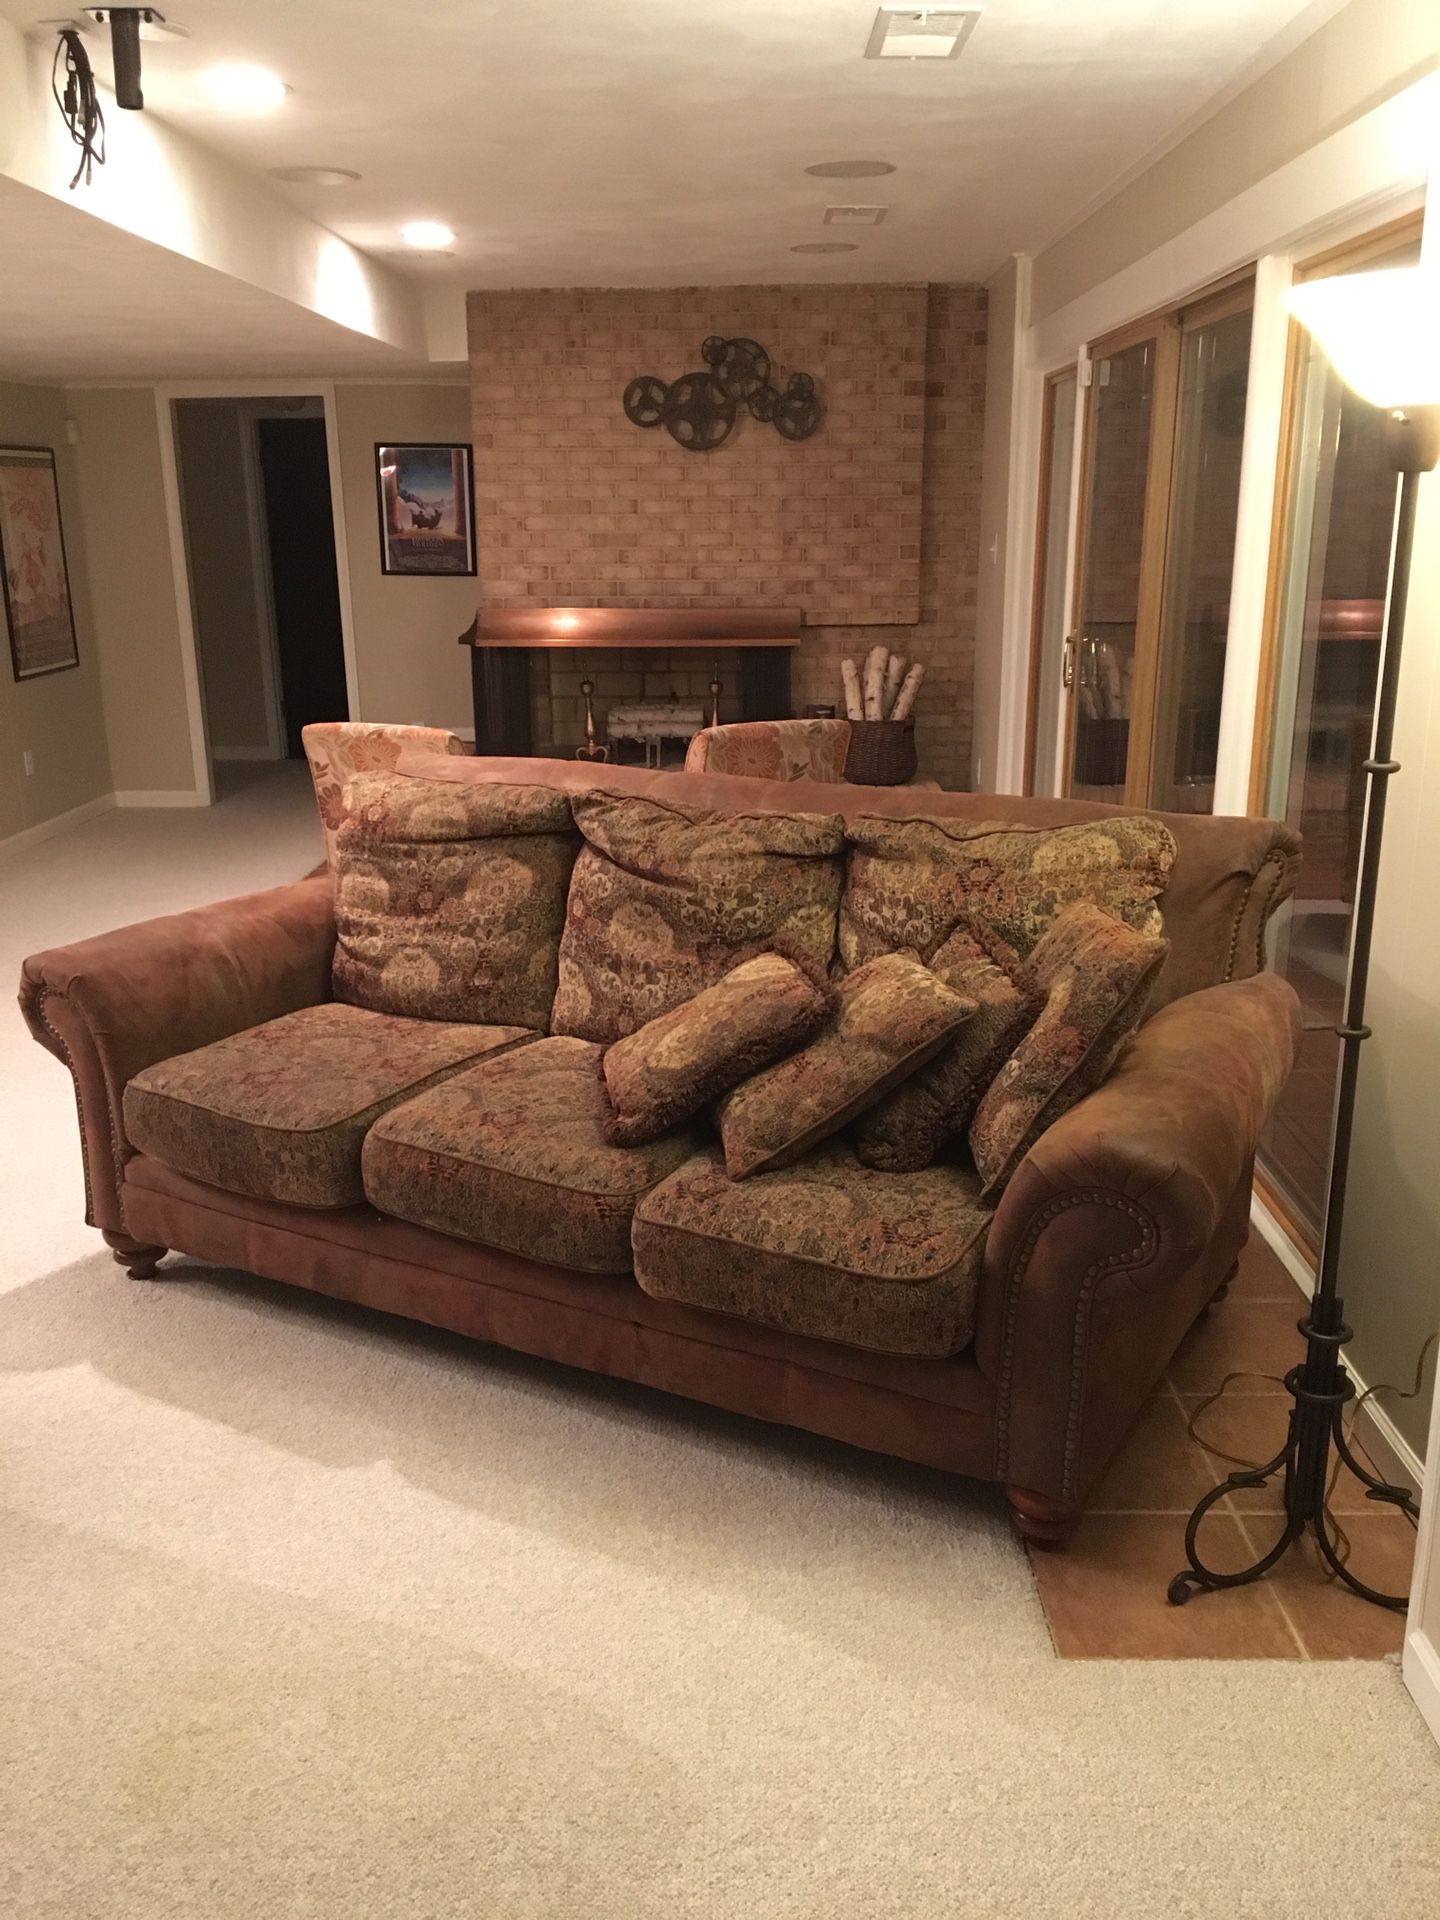 Comfy couch and loveseat